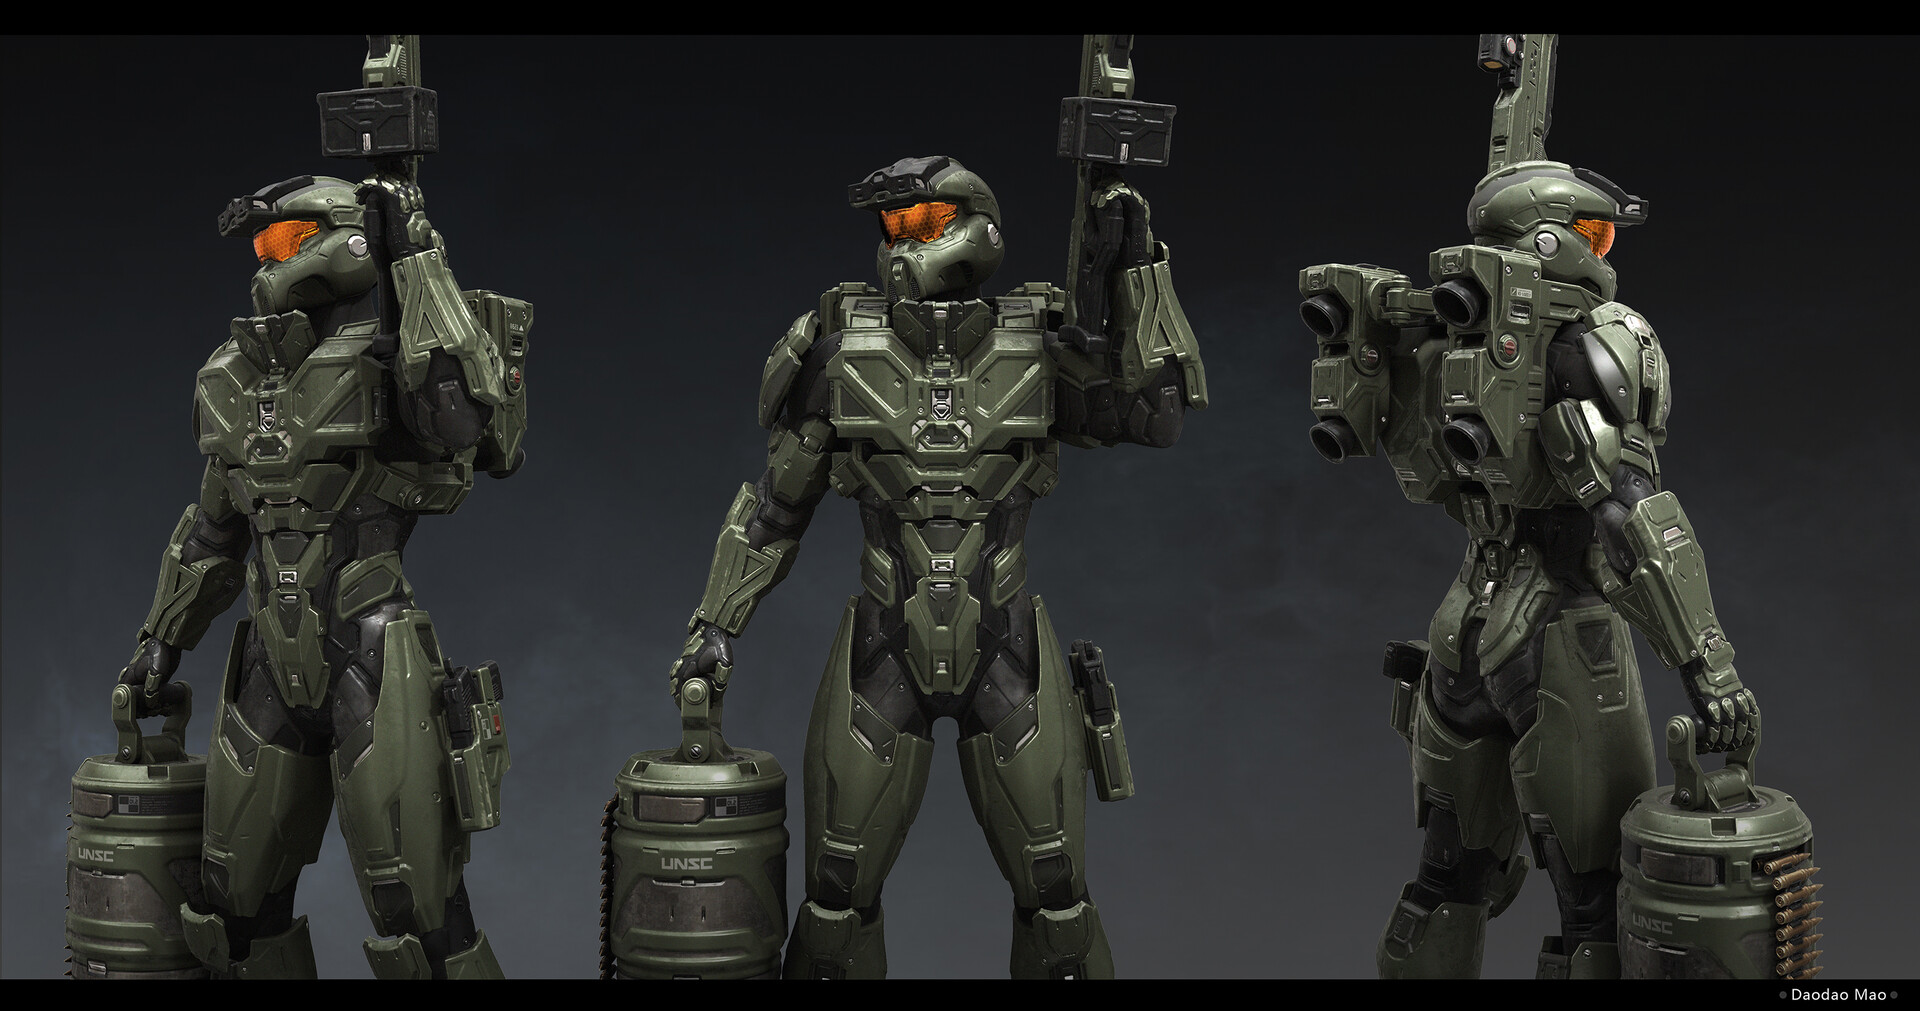 ArtStation - The Work of Fans of Halo